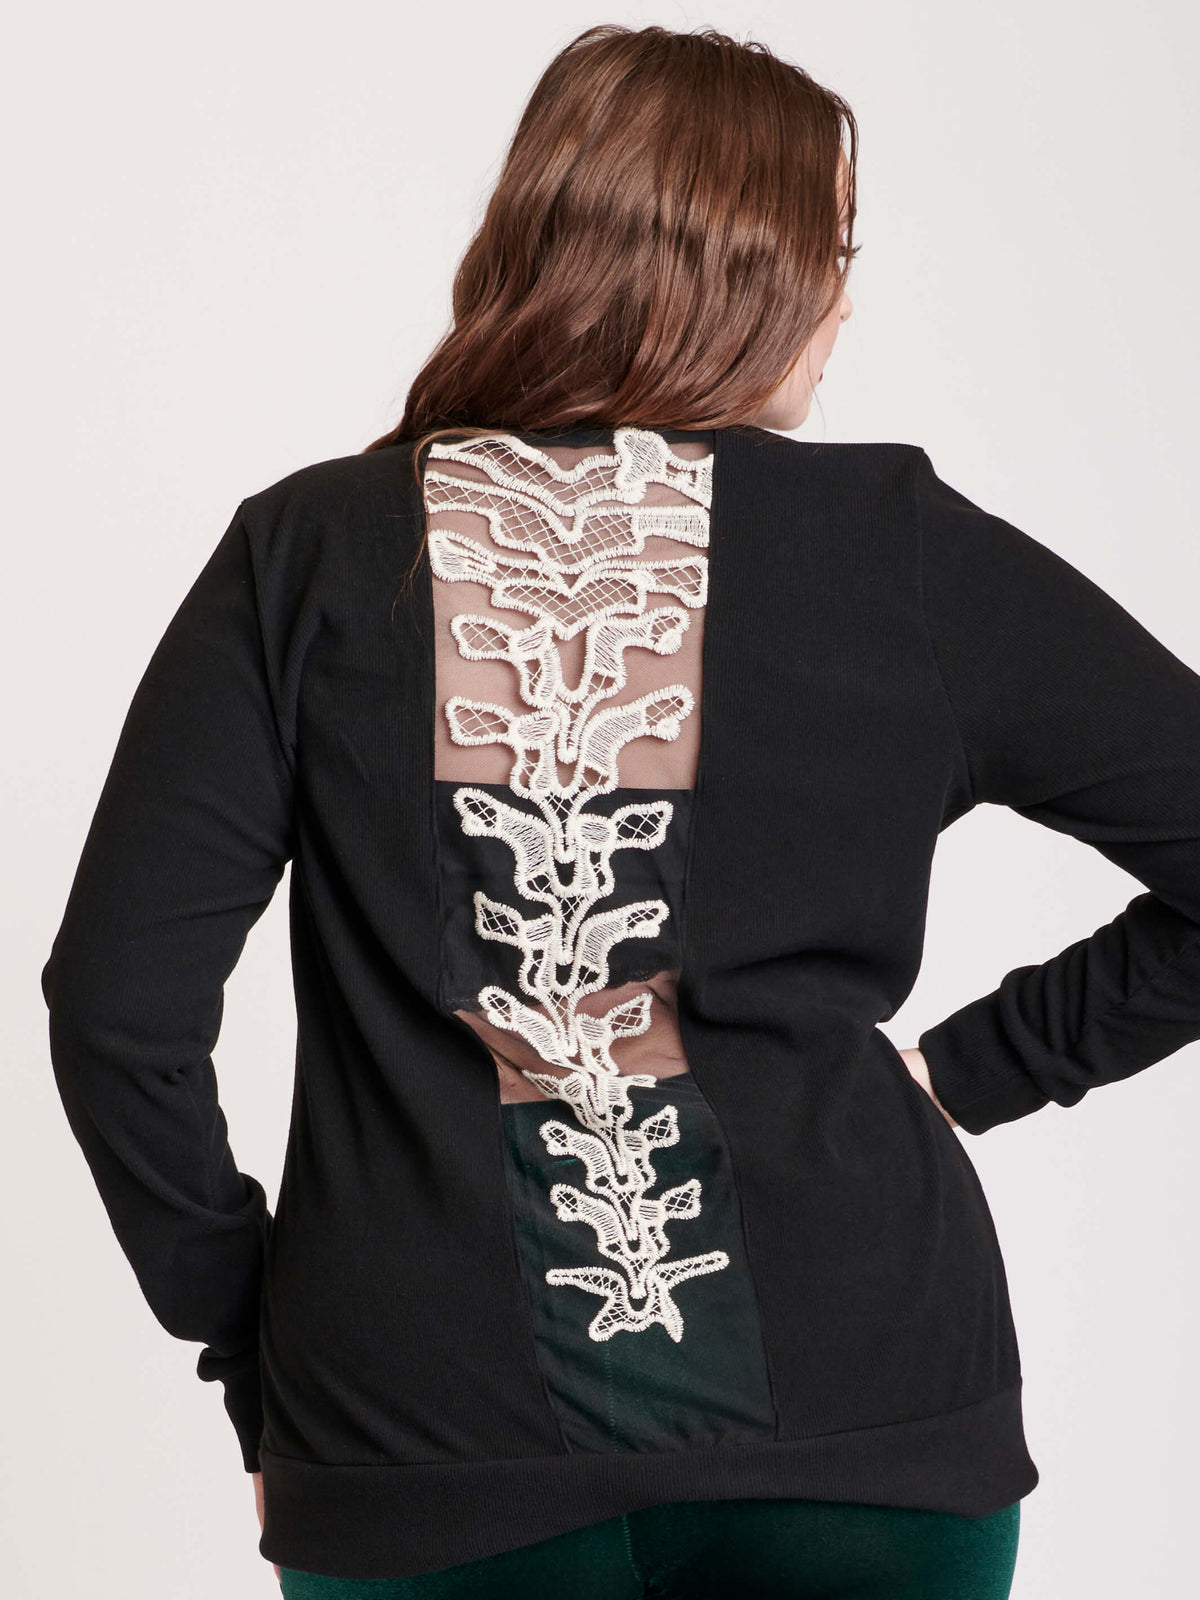 spine back embroidered applique with metal skull buttons